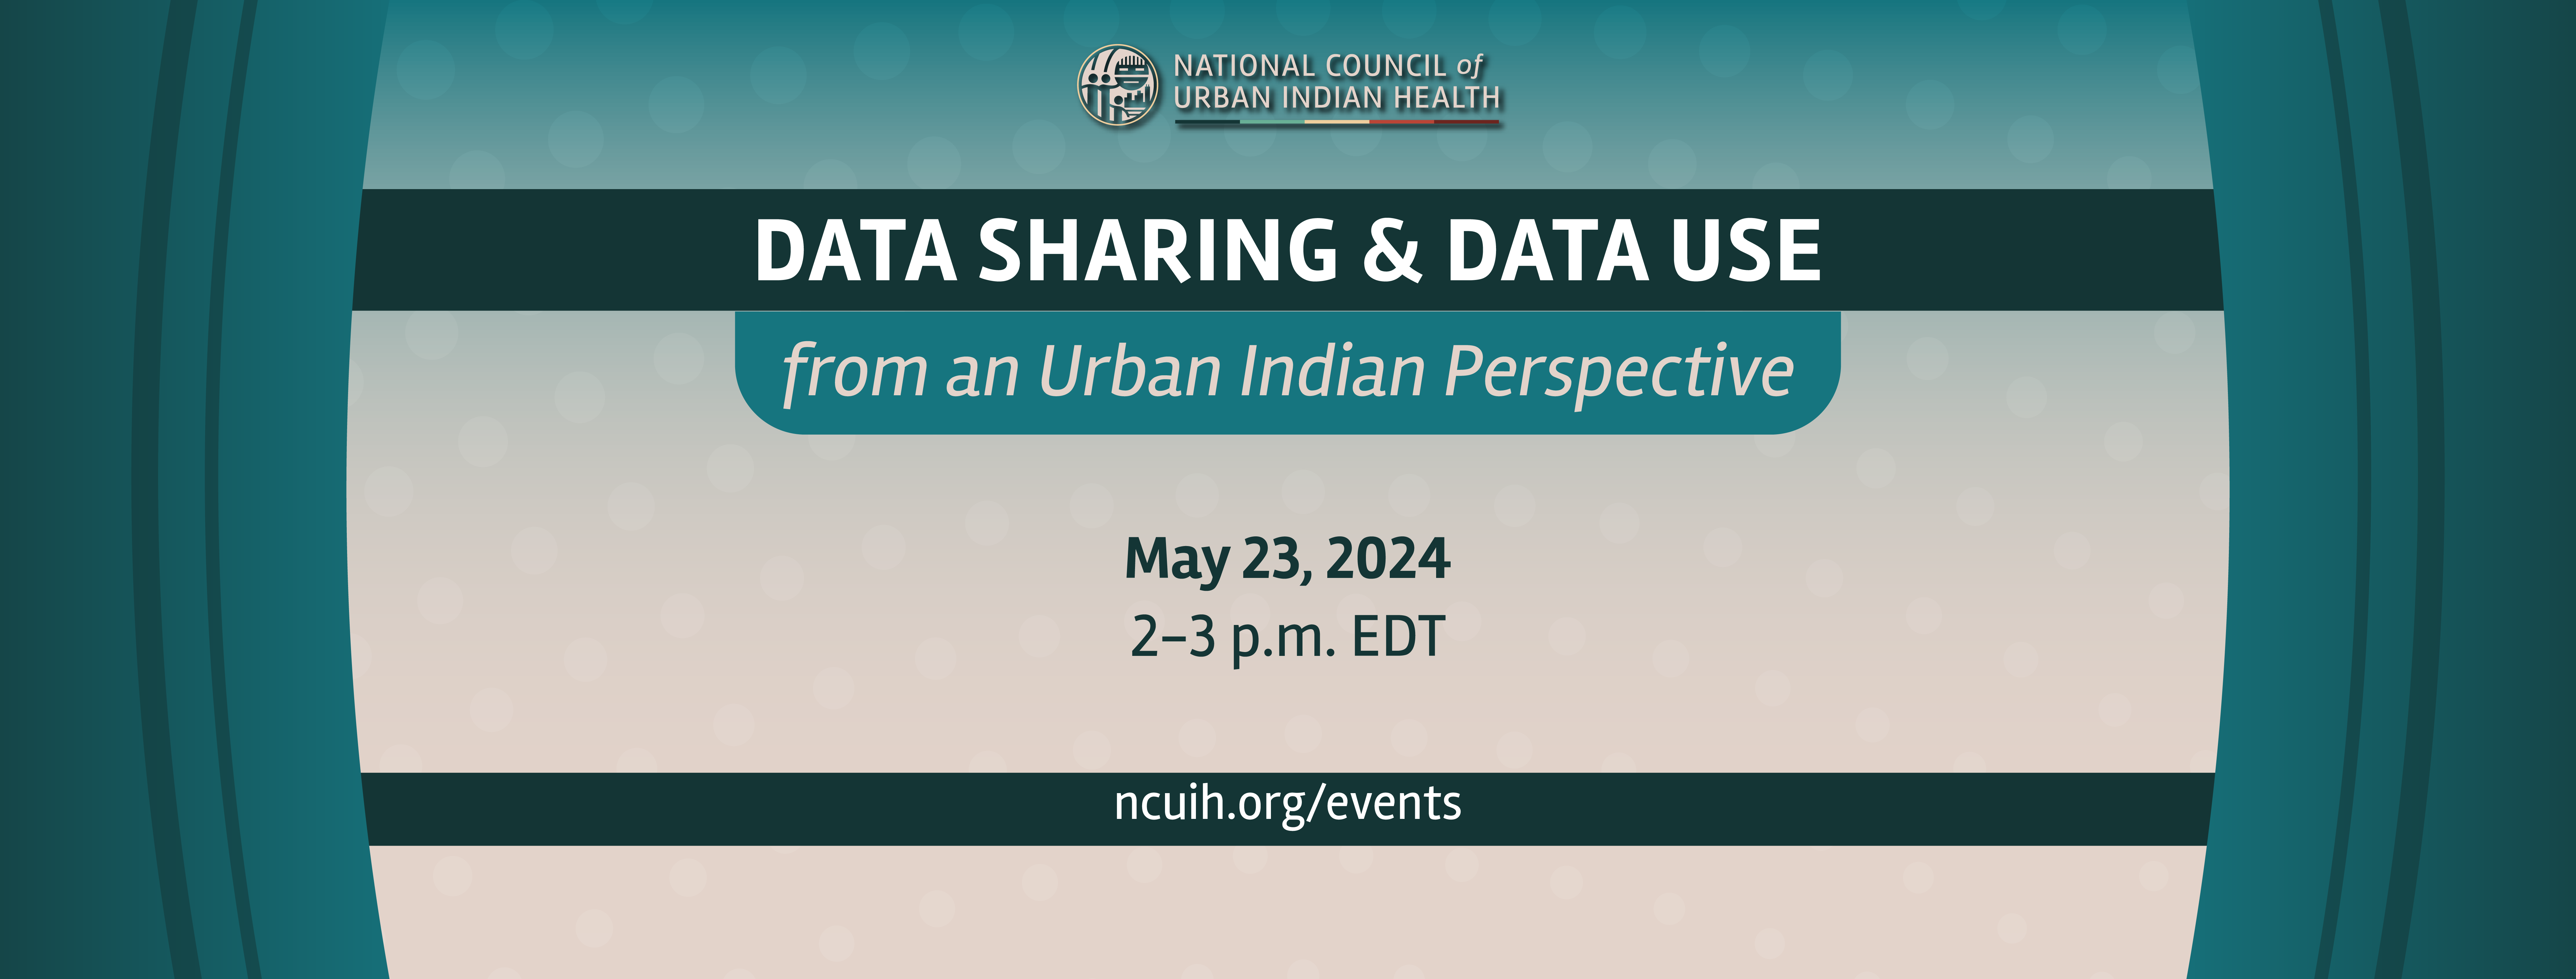 Data Sharing and Data Use from an Urban Indian Perspective